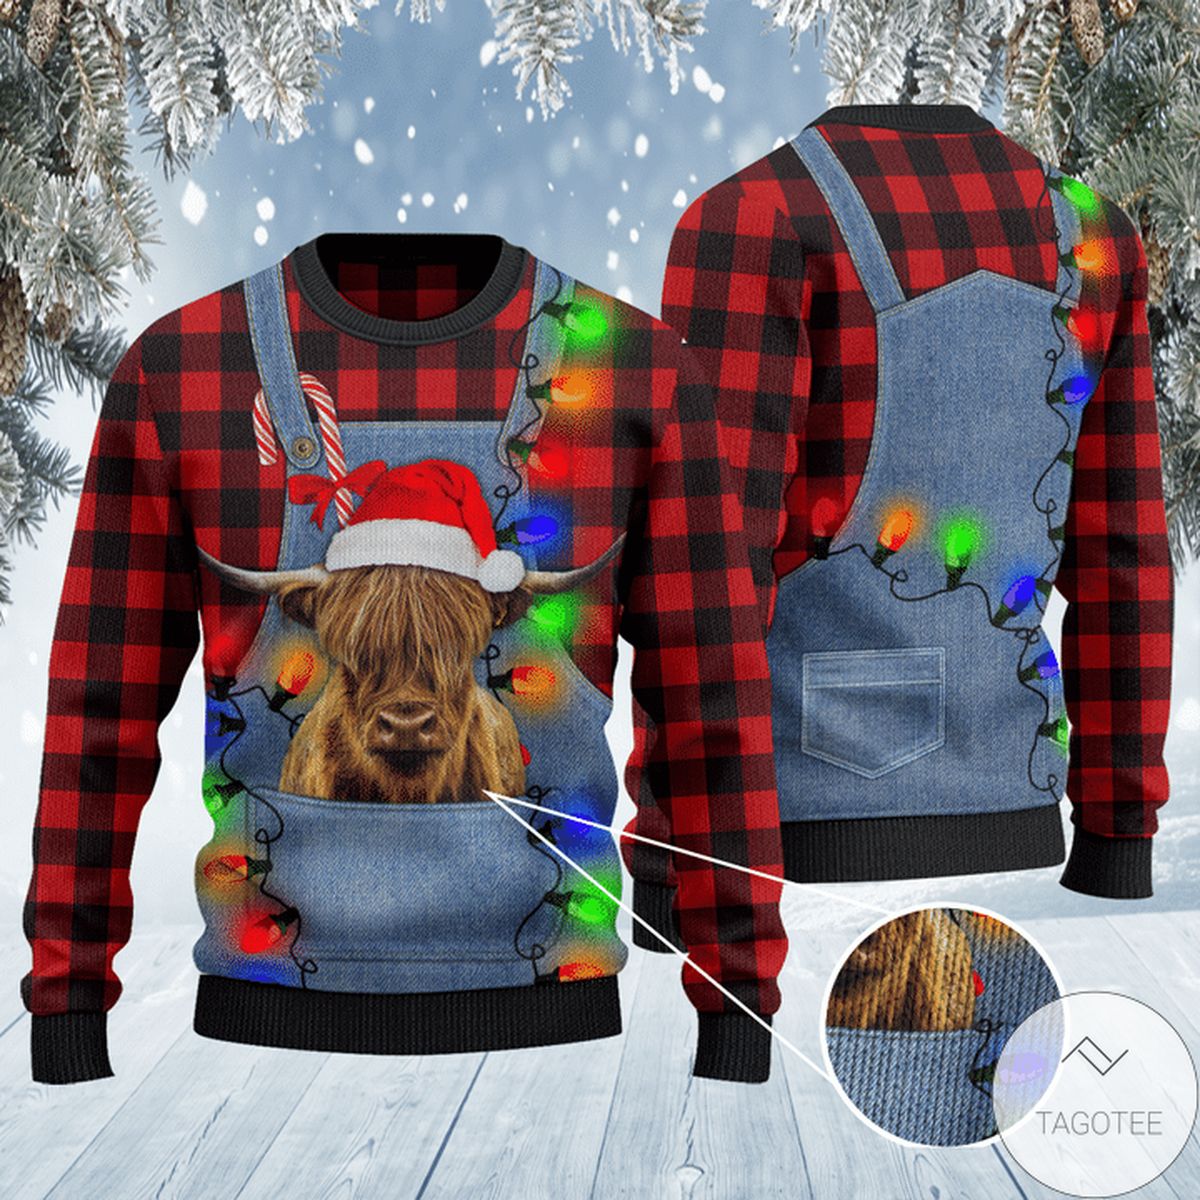 Highland Cattle Lovers Red Plaid Shirt And Denim Bib Overalls Ugly Christmas Sweater